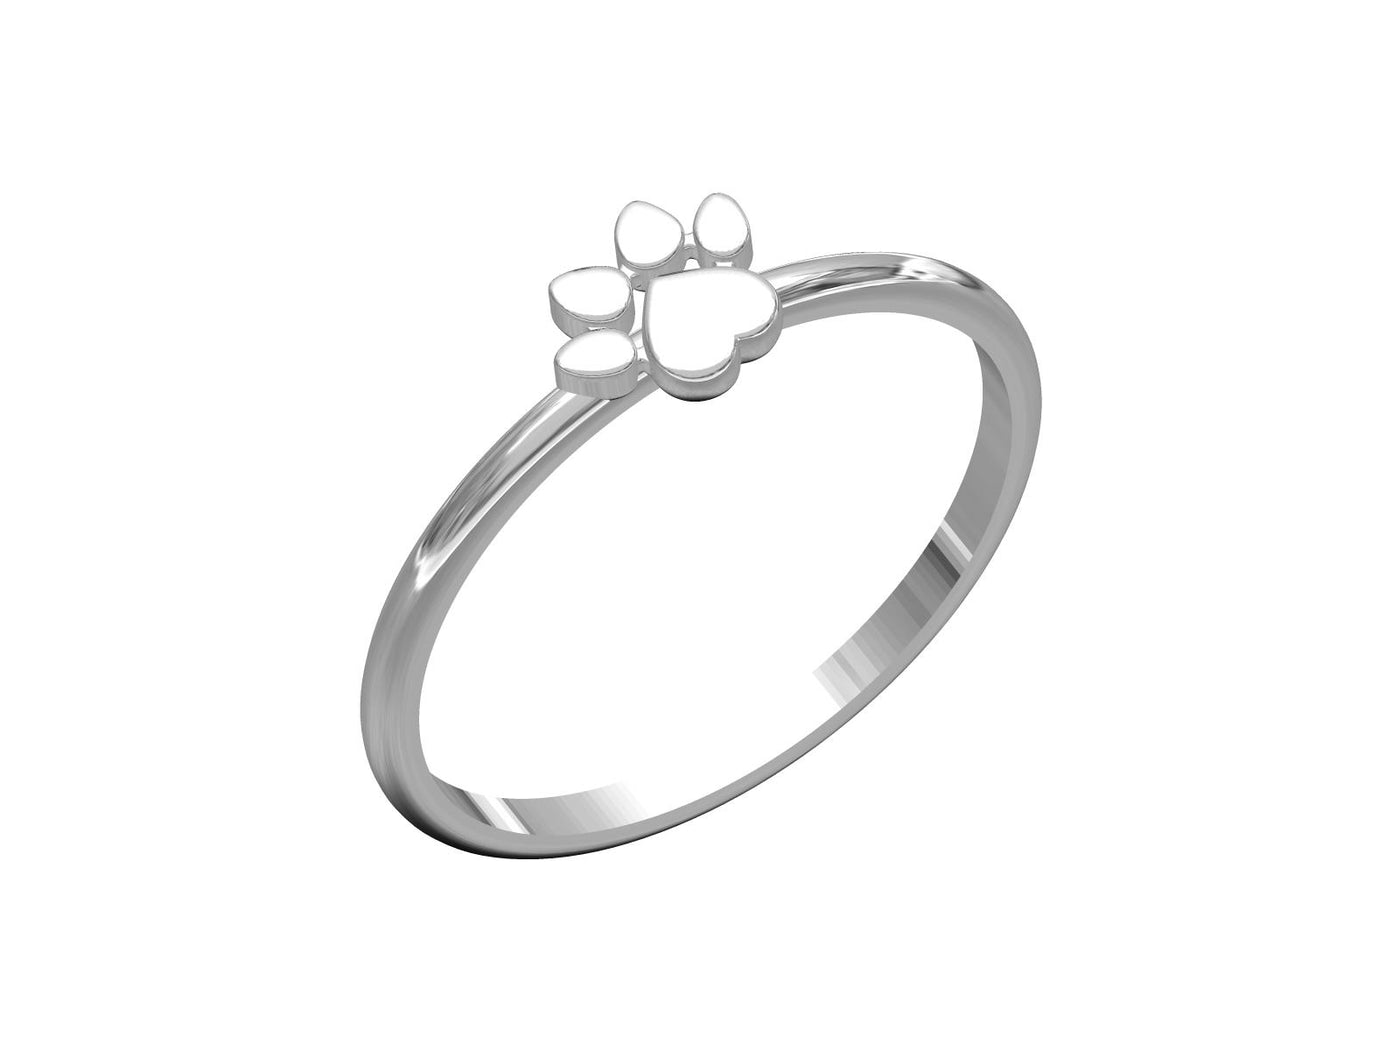 Paw Print "Best Friends" Ring